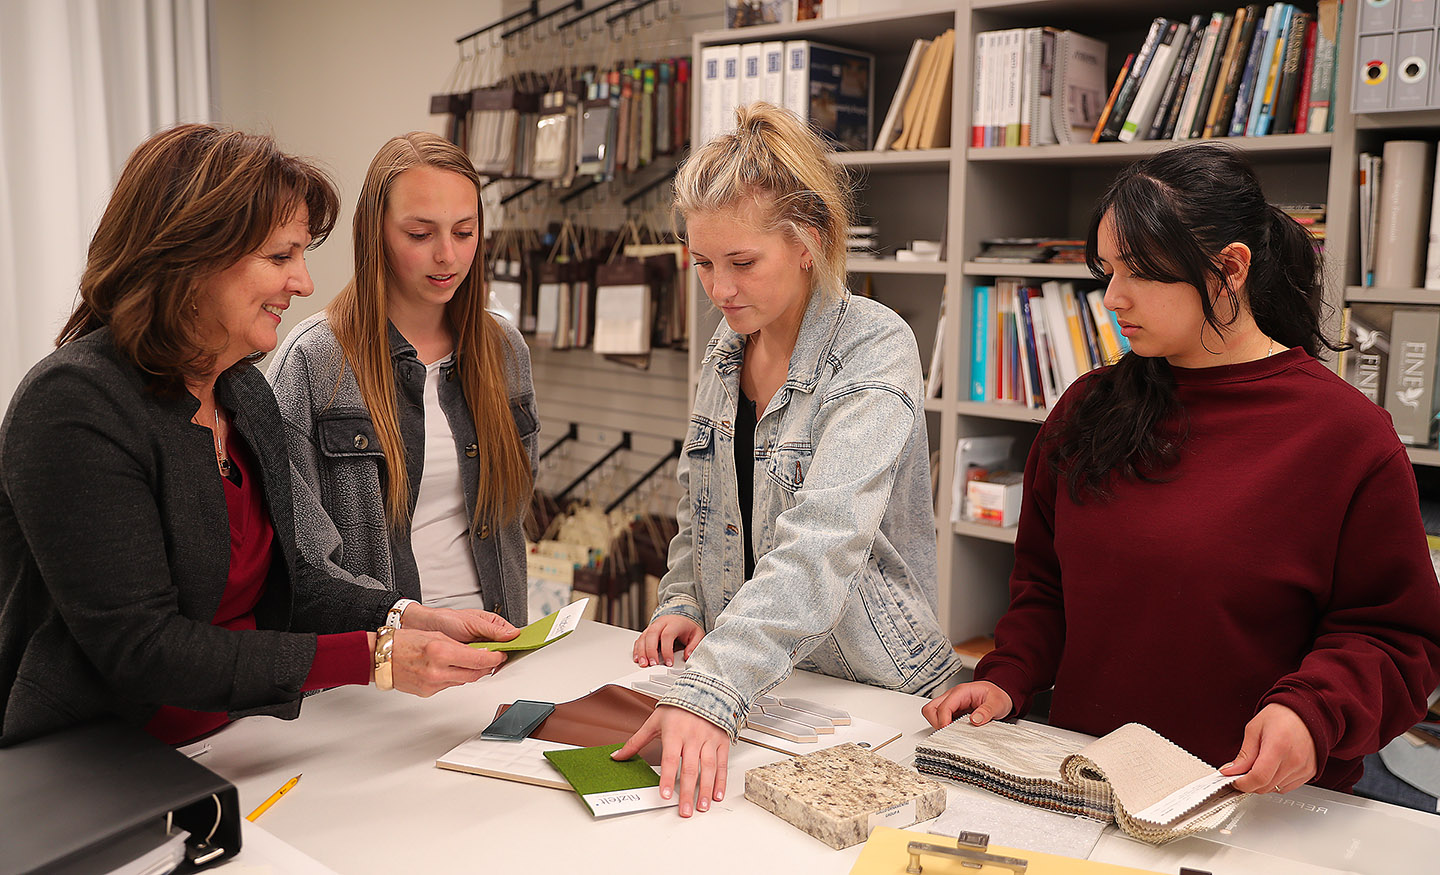 Students in UNK’s interior and product design program work one-on-one with faculty while learning about every element of the design field. (Photos by Erika Pritchard, UNK Communications)